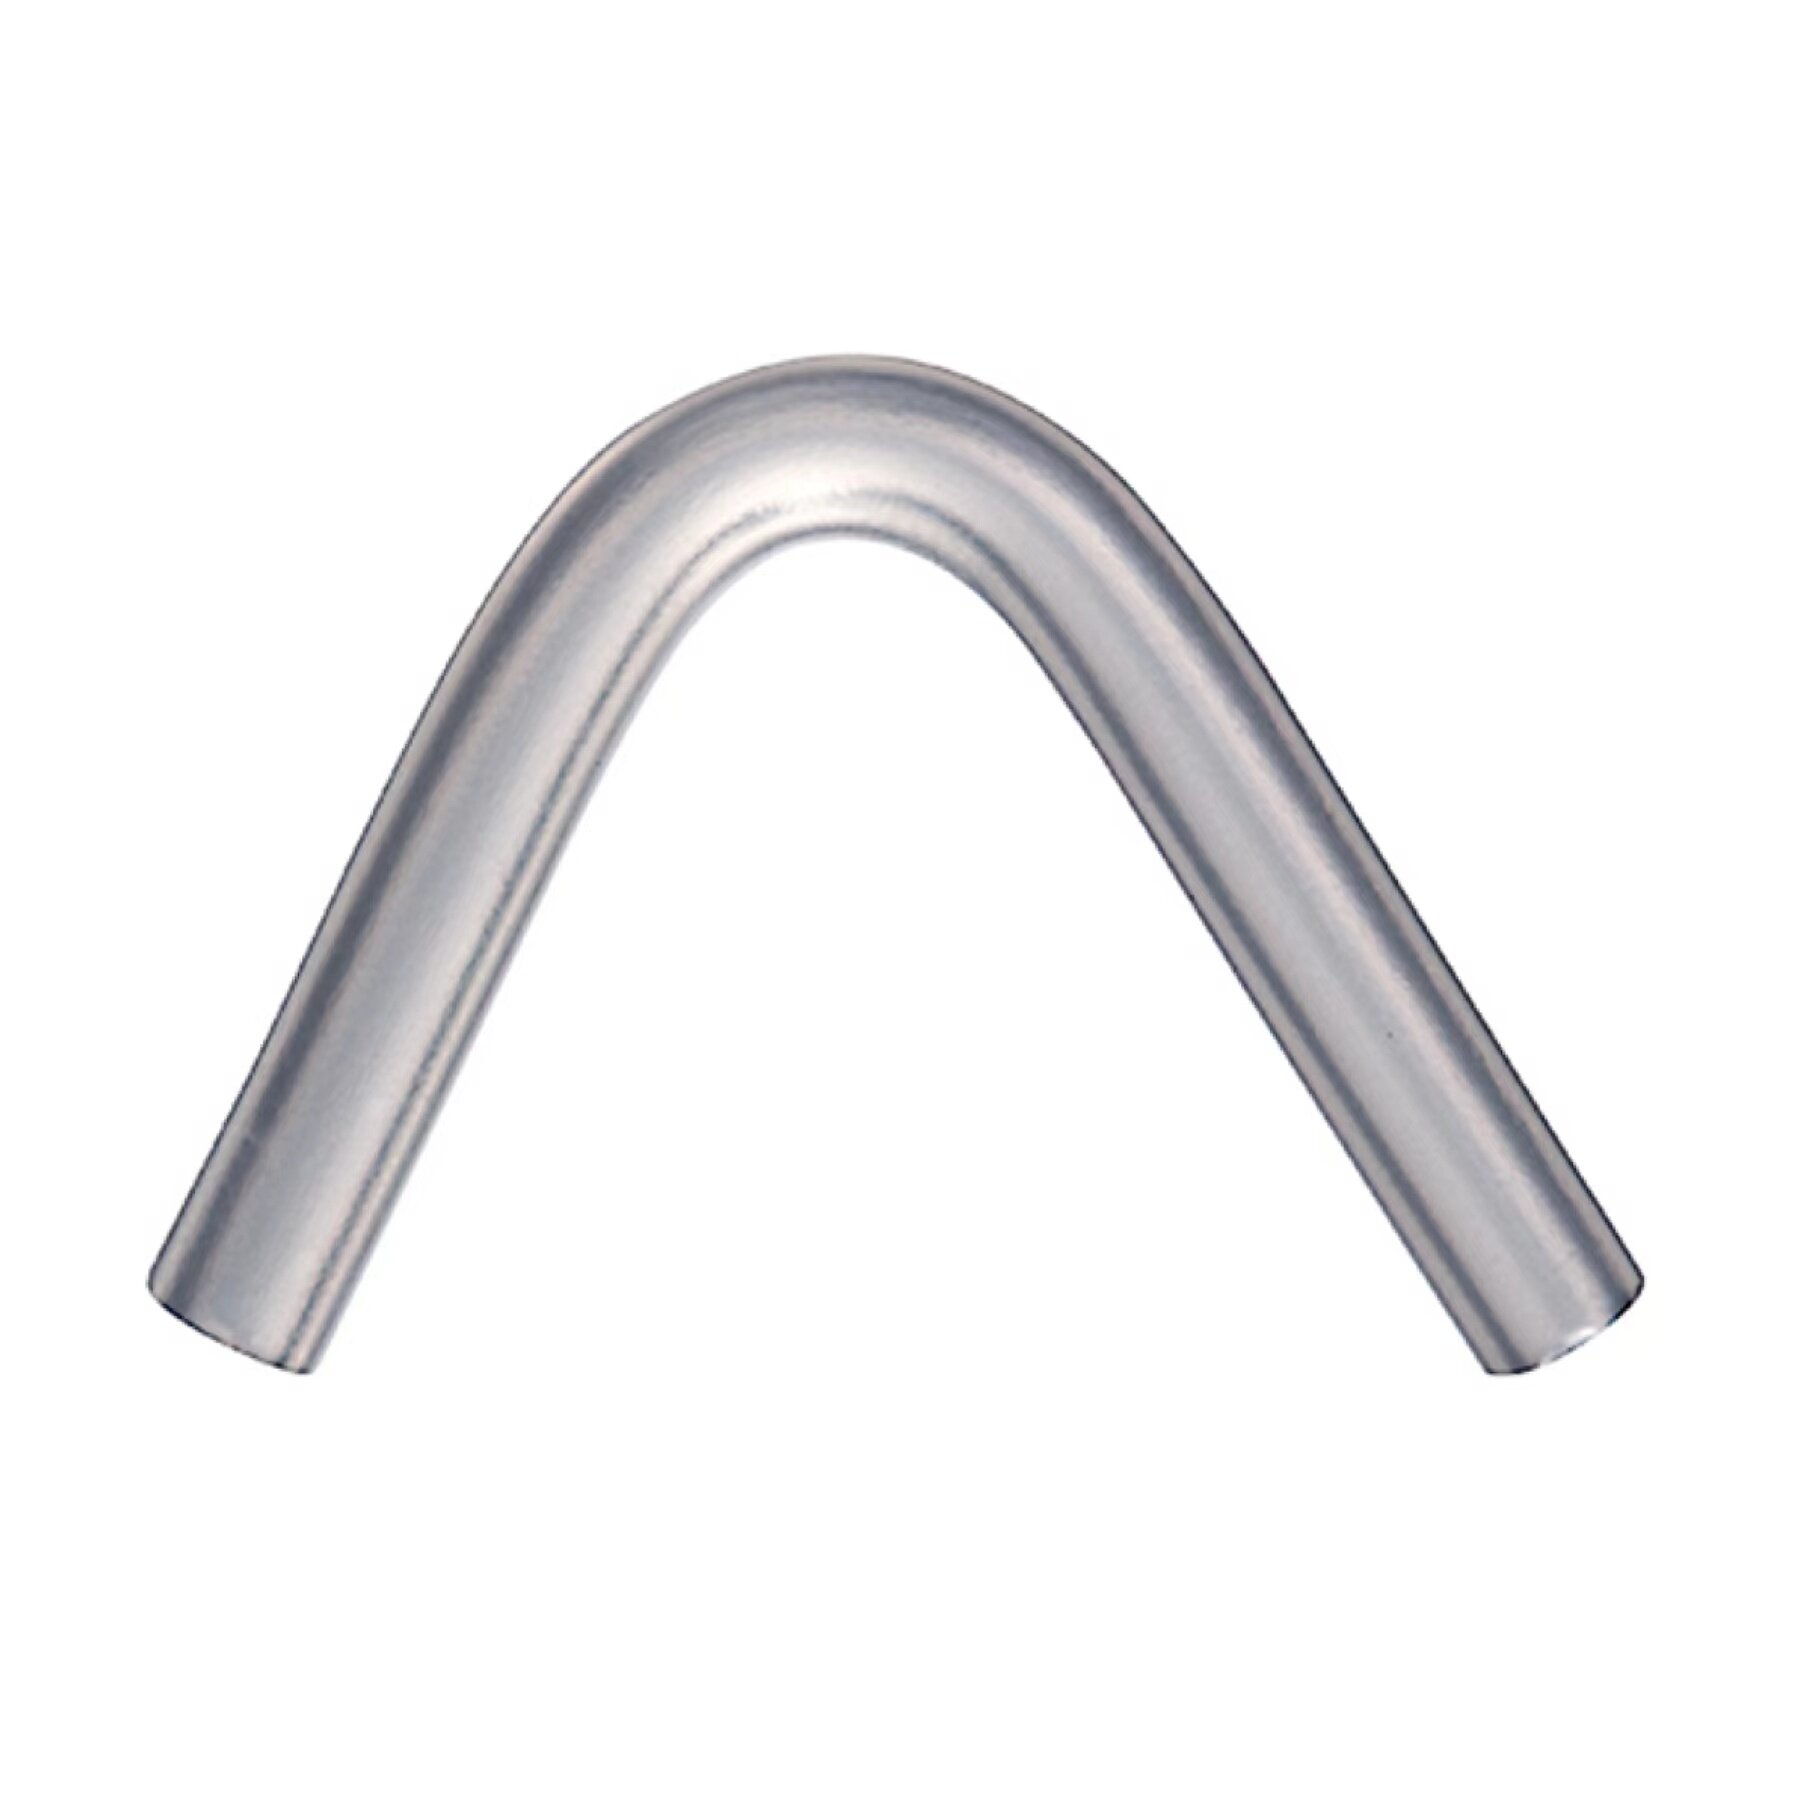 Plastic Earmold Hook Elbow Tubing Connector For BTE Hearing Aids